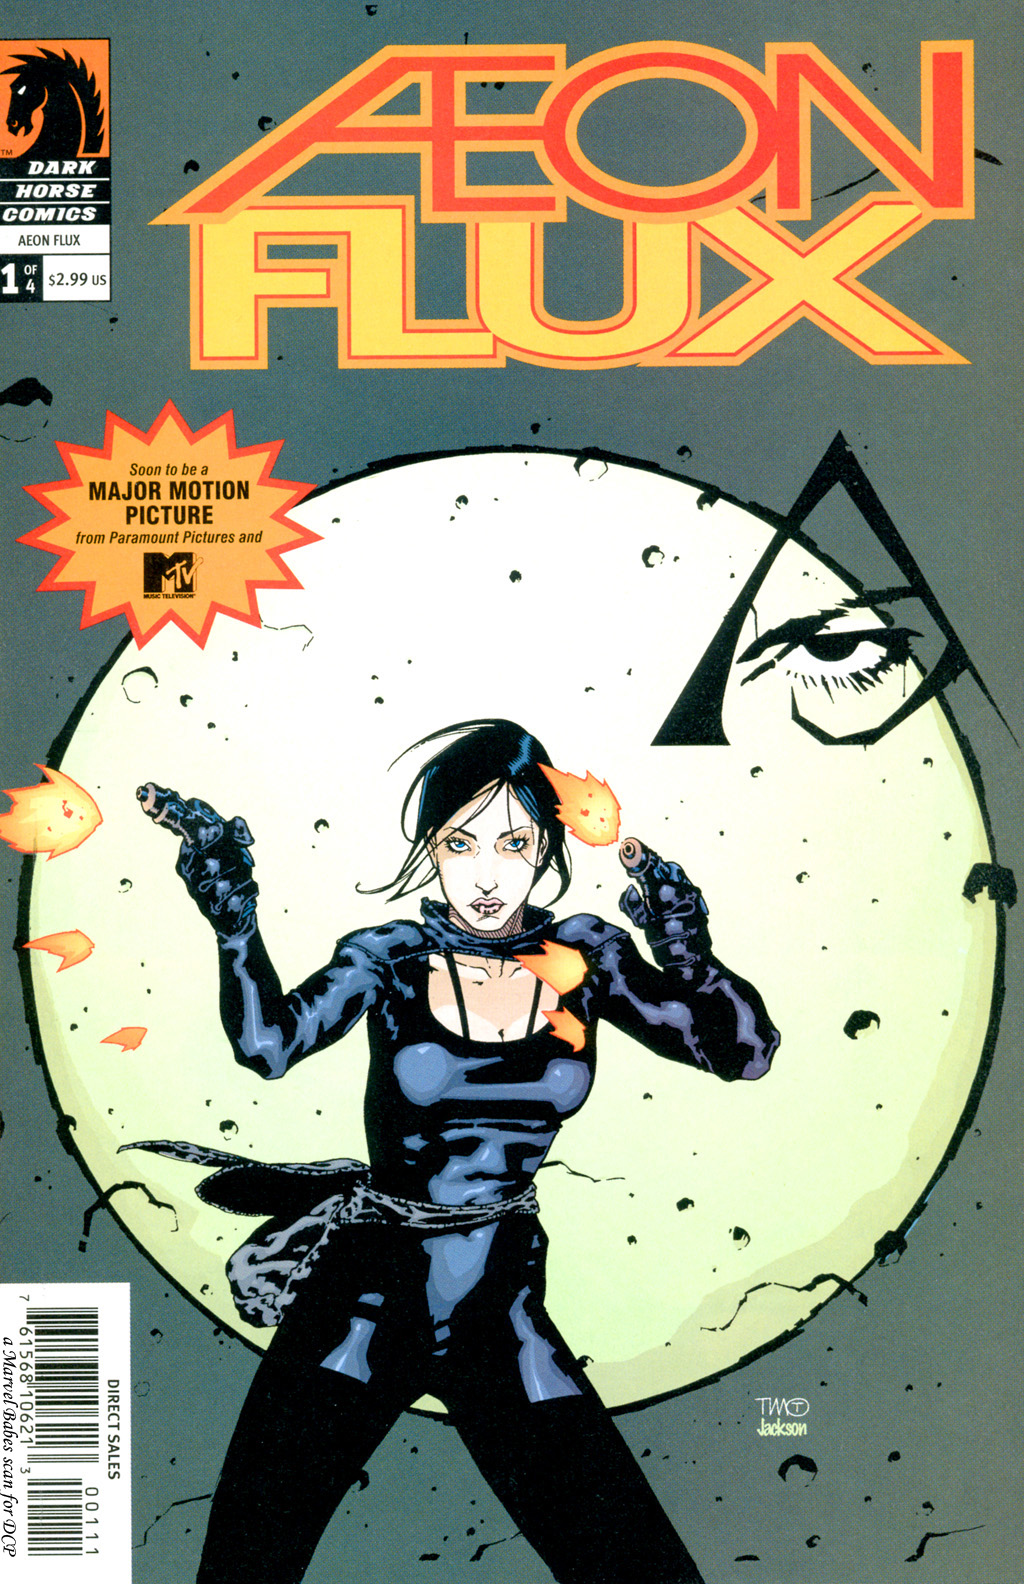 Aeon Flux Xxx Toons - Aeon Flux Issue 1 | Read Aeon Flux Issue 1 comic online in high quality.  Read Full Comic online for free - Read comics online in high quality  .|viewcomiconline.com